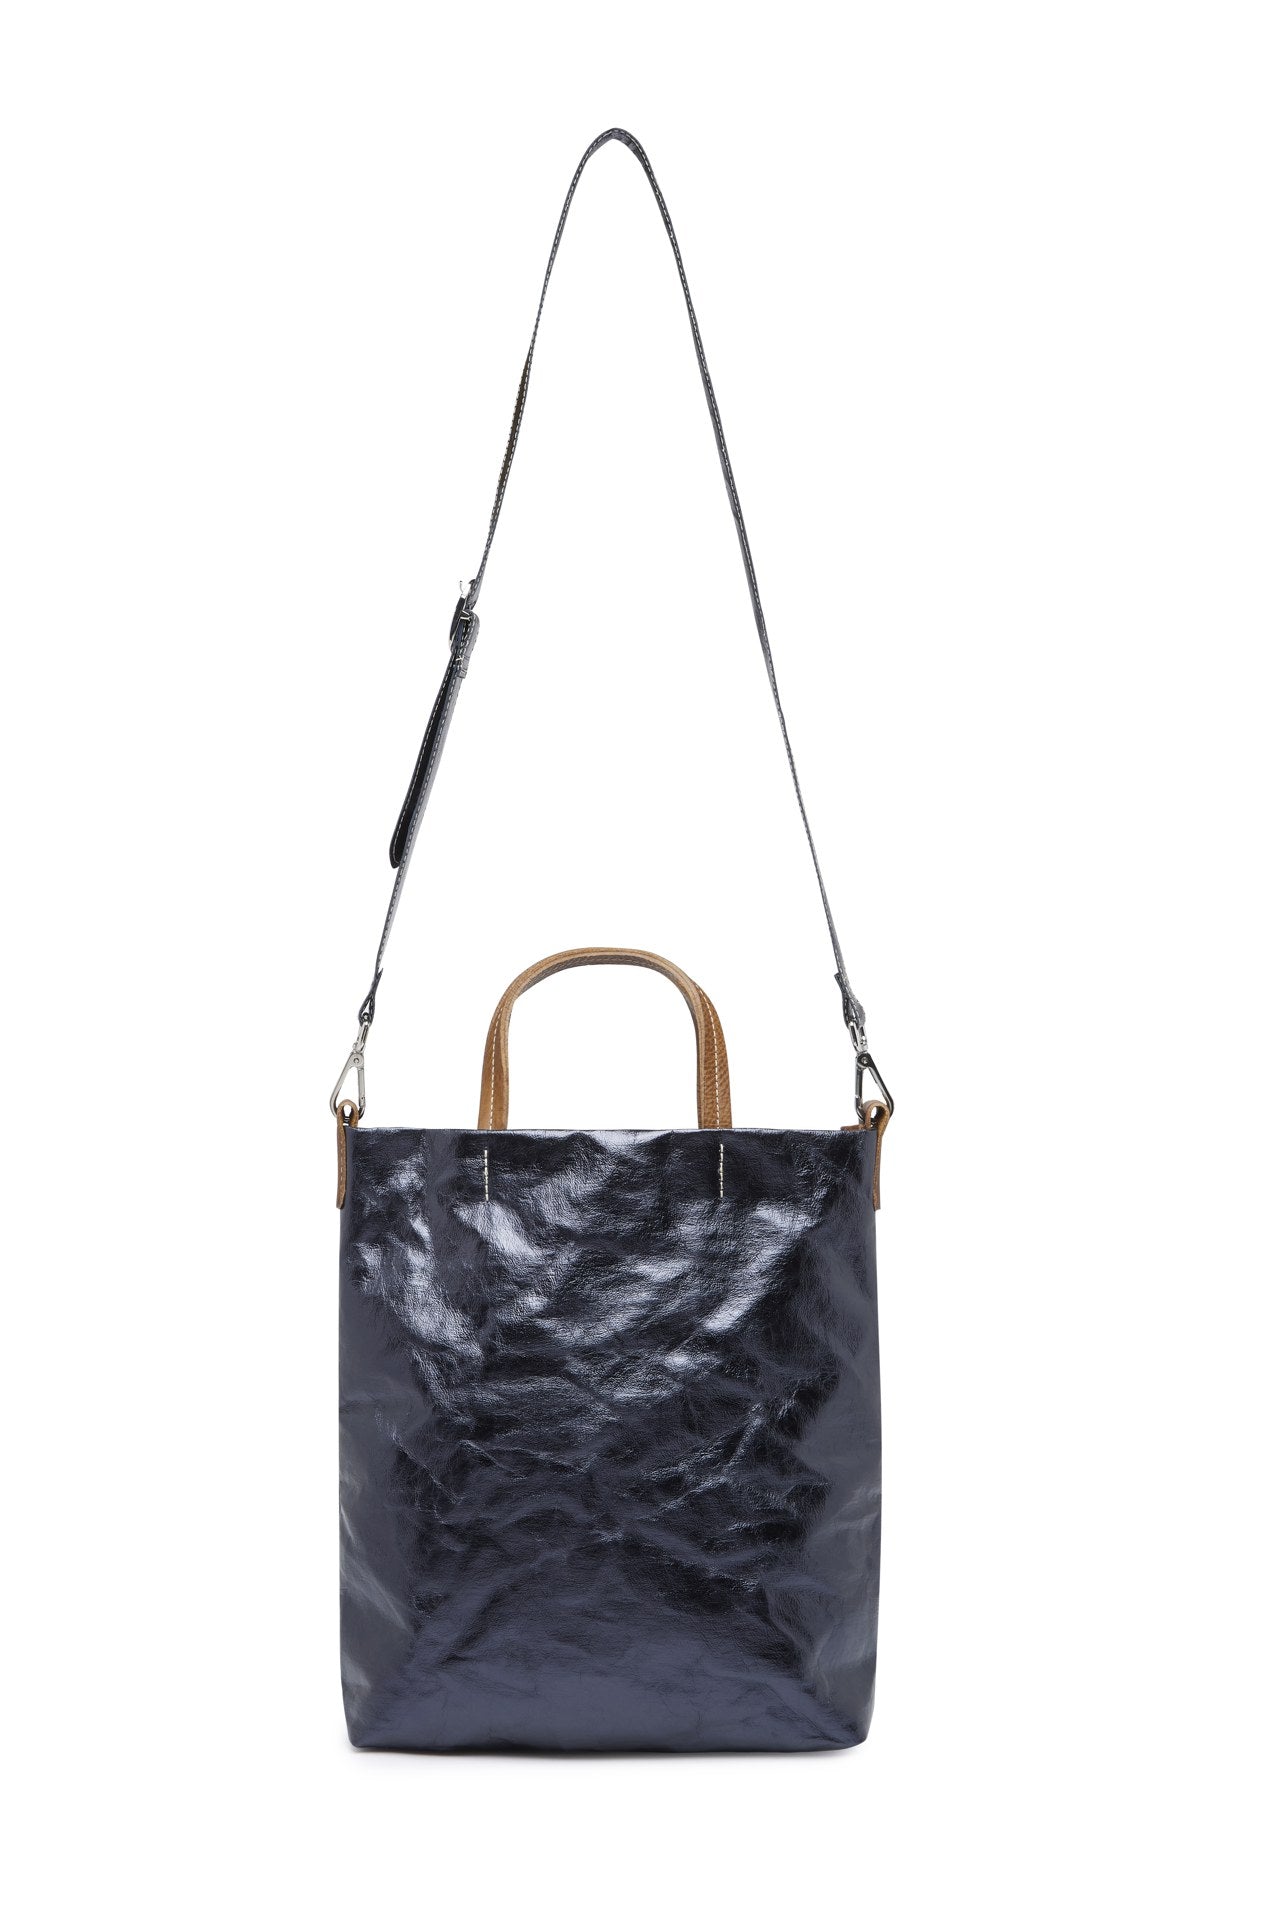 A washable paper tote is shown with a long shoulder strap pointing skywards. It has two top handles and is metallic navy in colour.